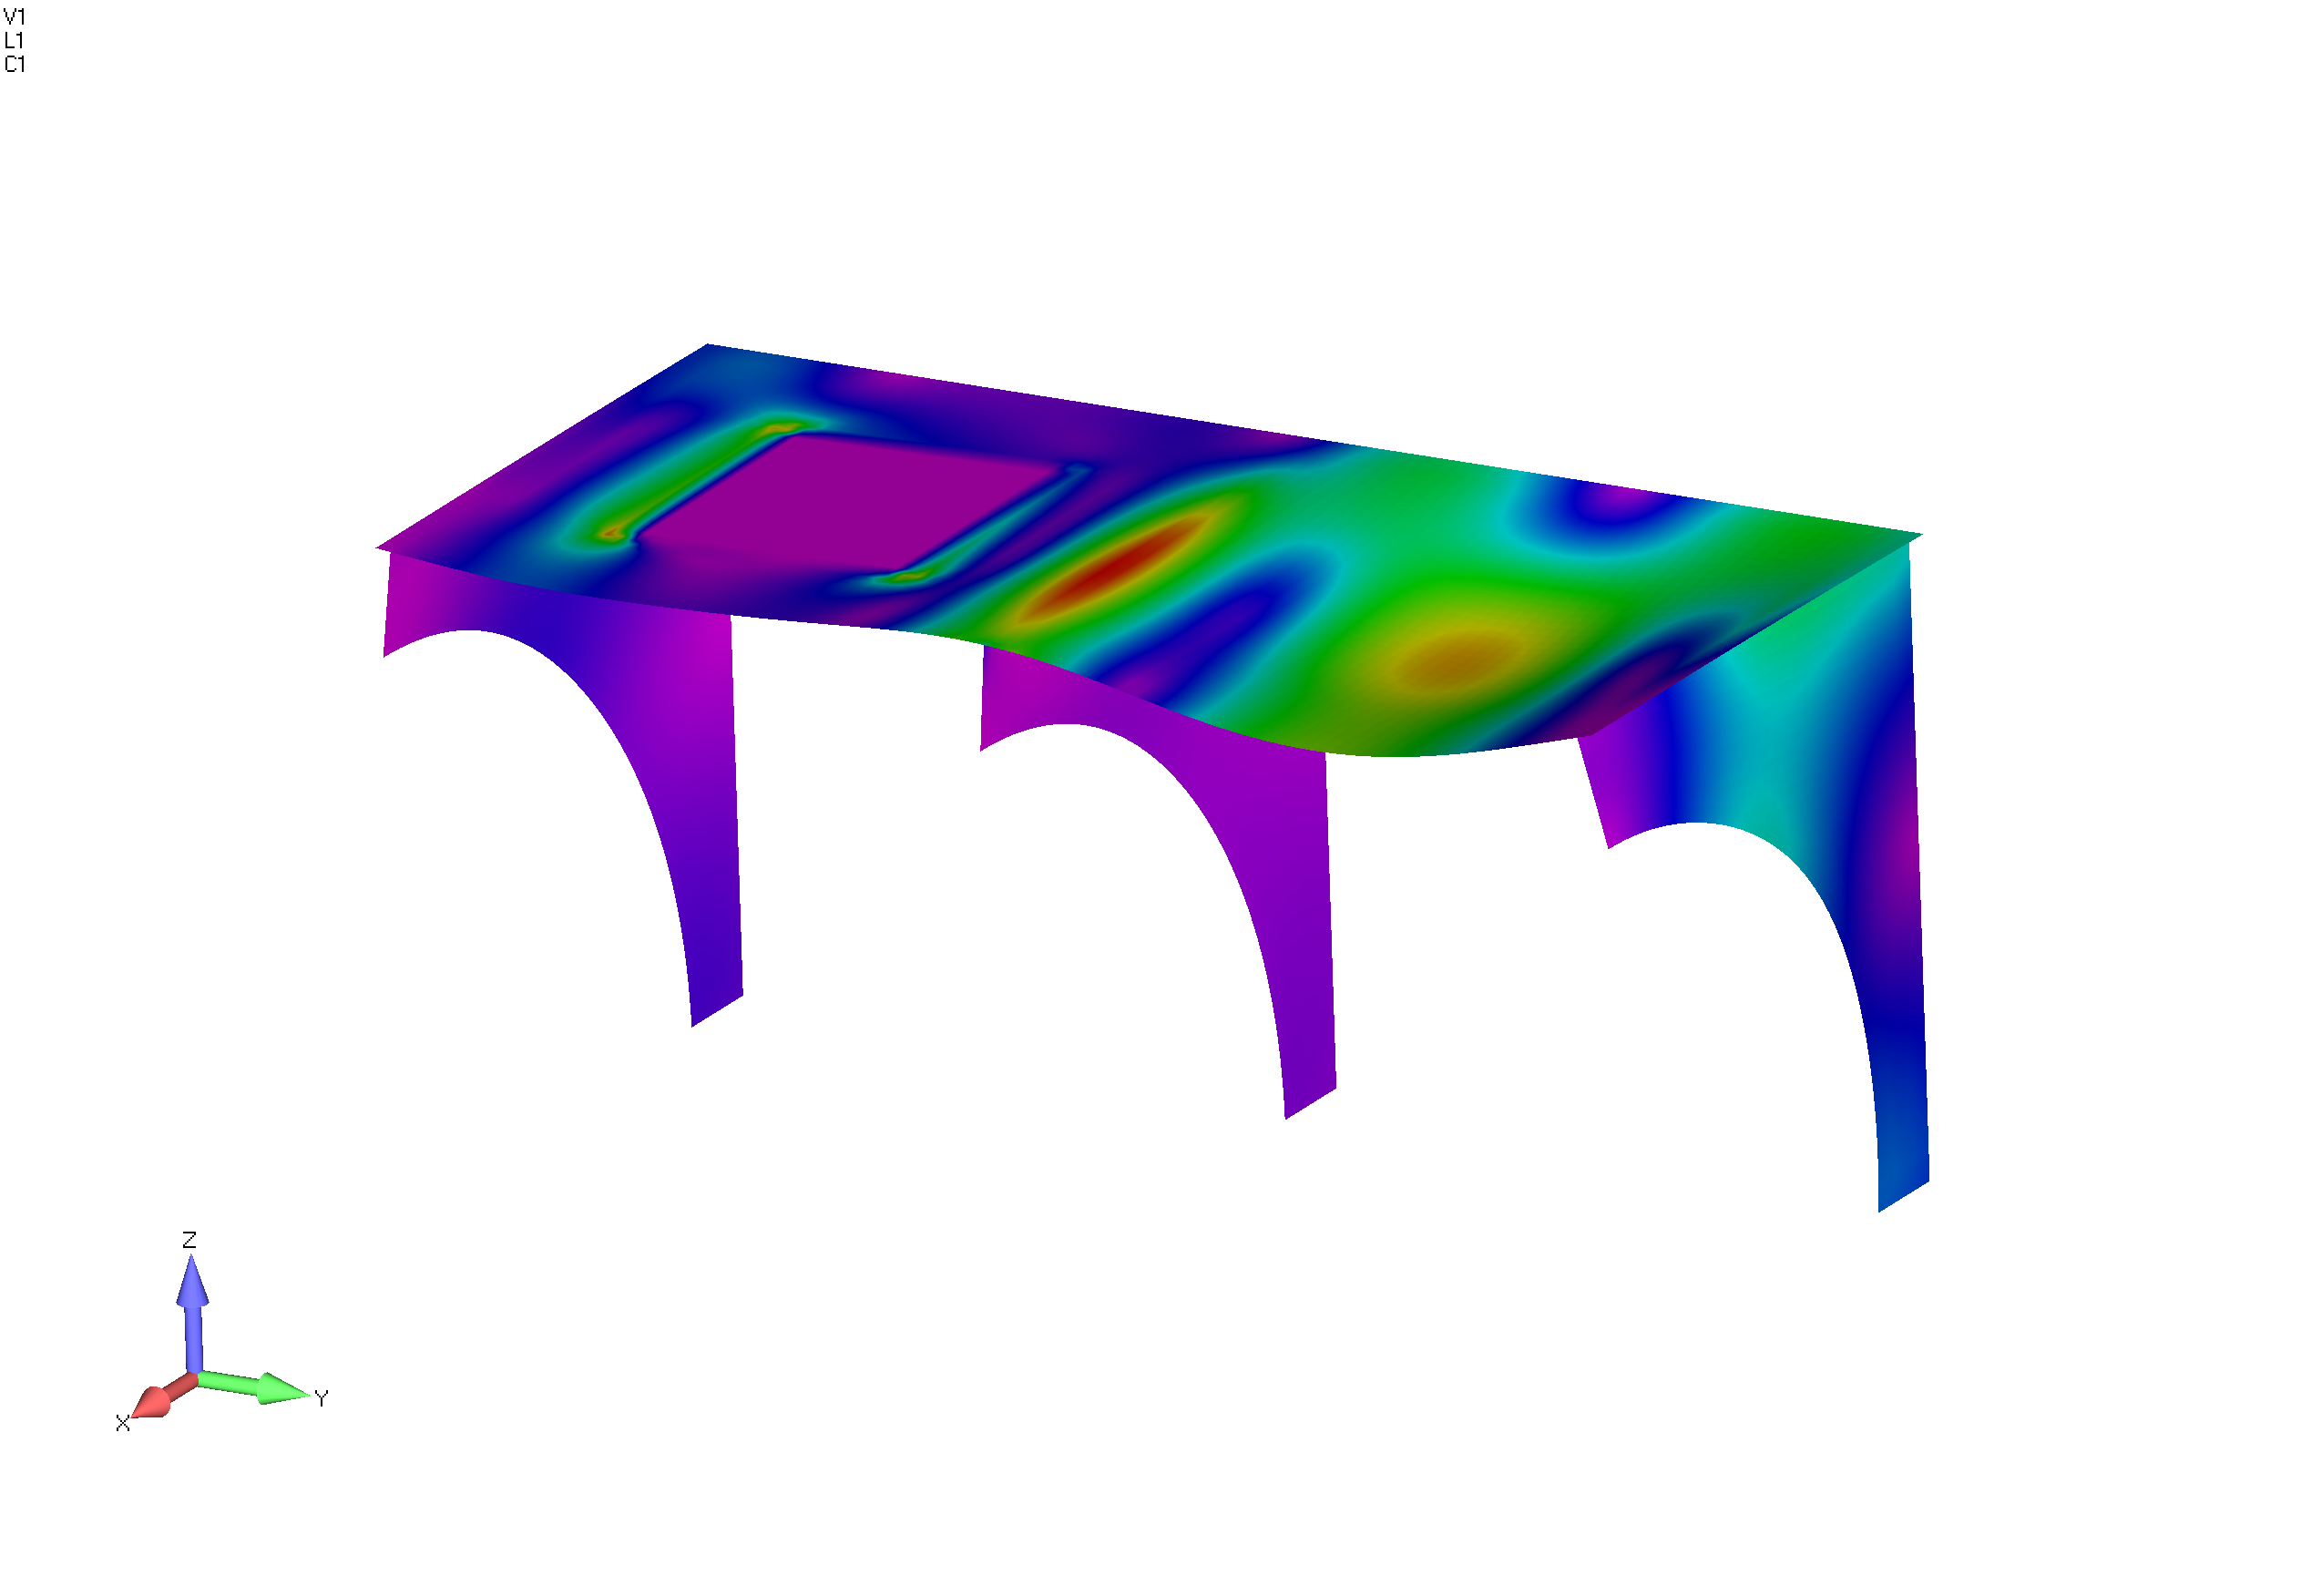 FEA shelf stress plot (von mises) shownig difference between RBE2 & RBE3 footprint